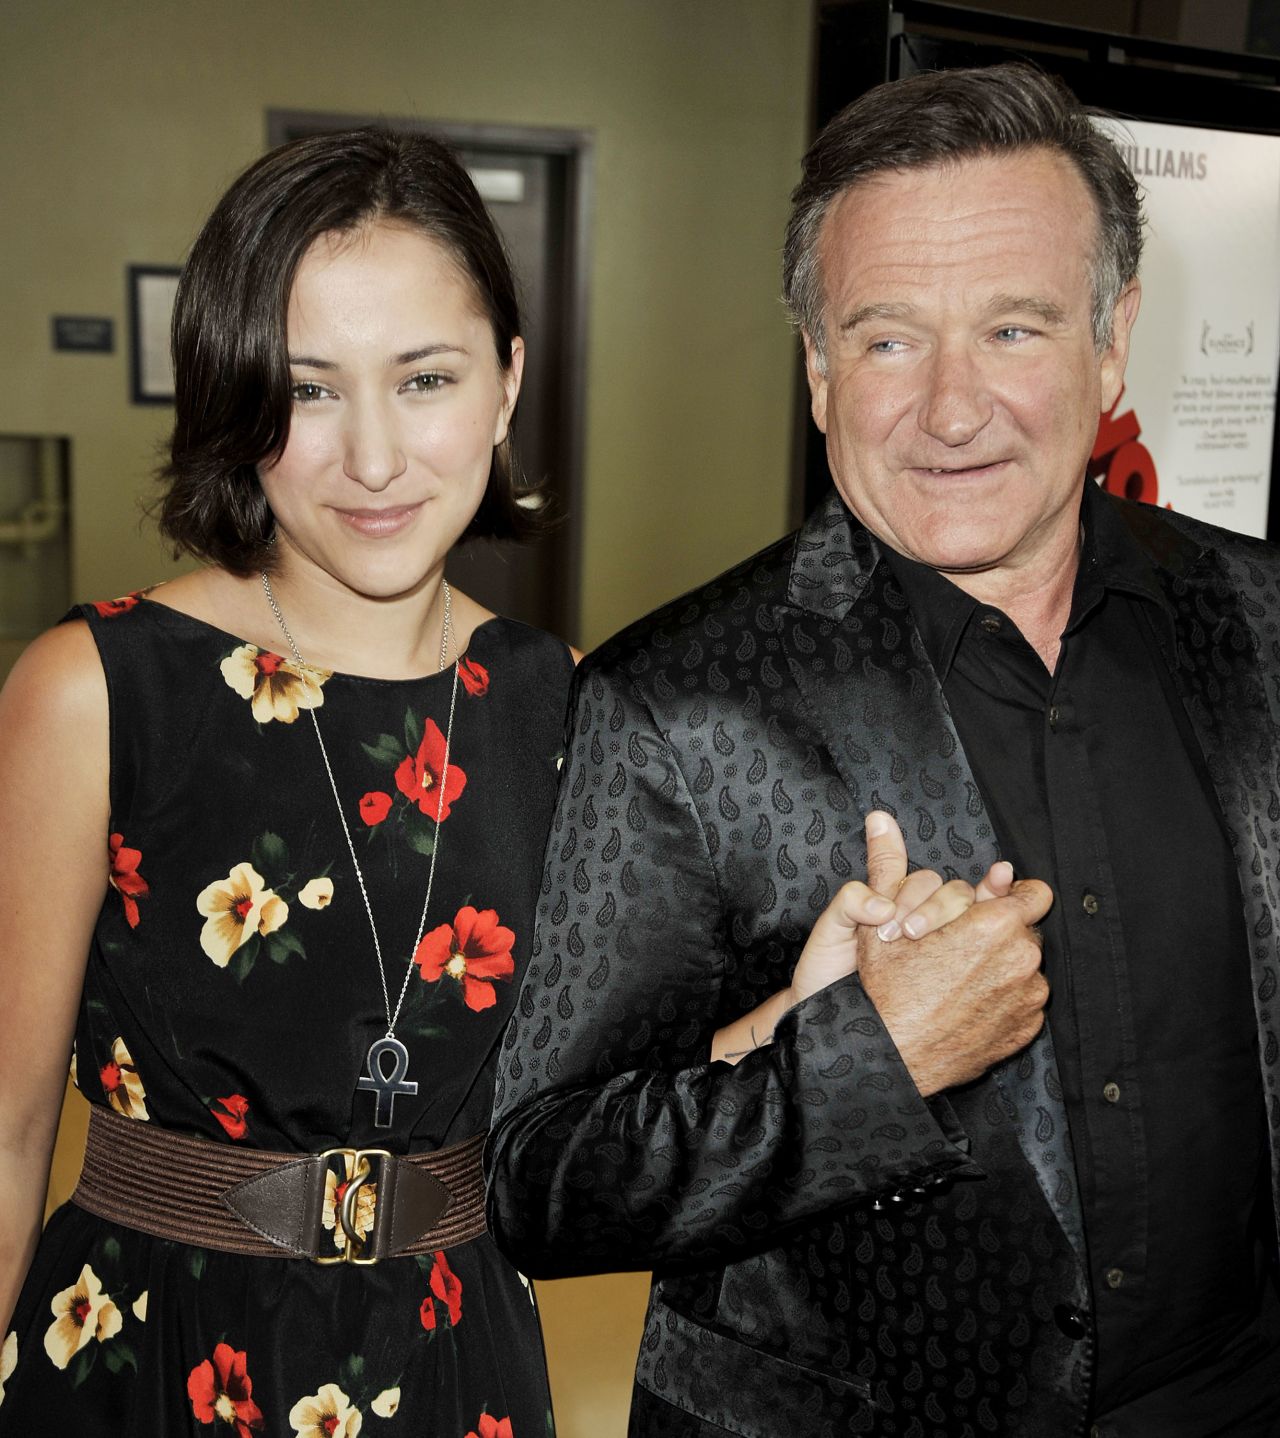 Zelda Williams left social media for several weeks in August after she received graphic, abusive messages on Instagram and Twitter about the death of her father, comedy legend Robin Williams.